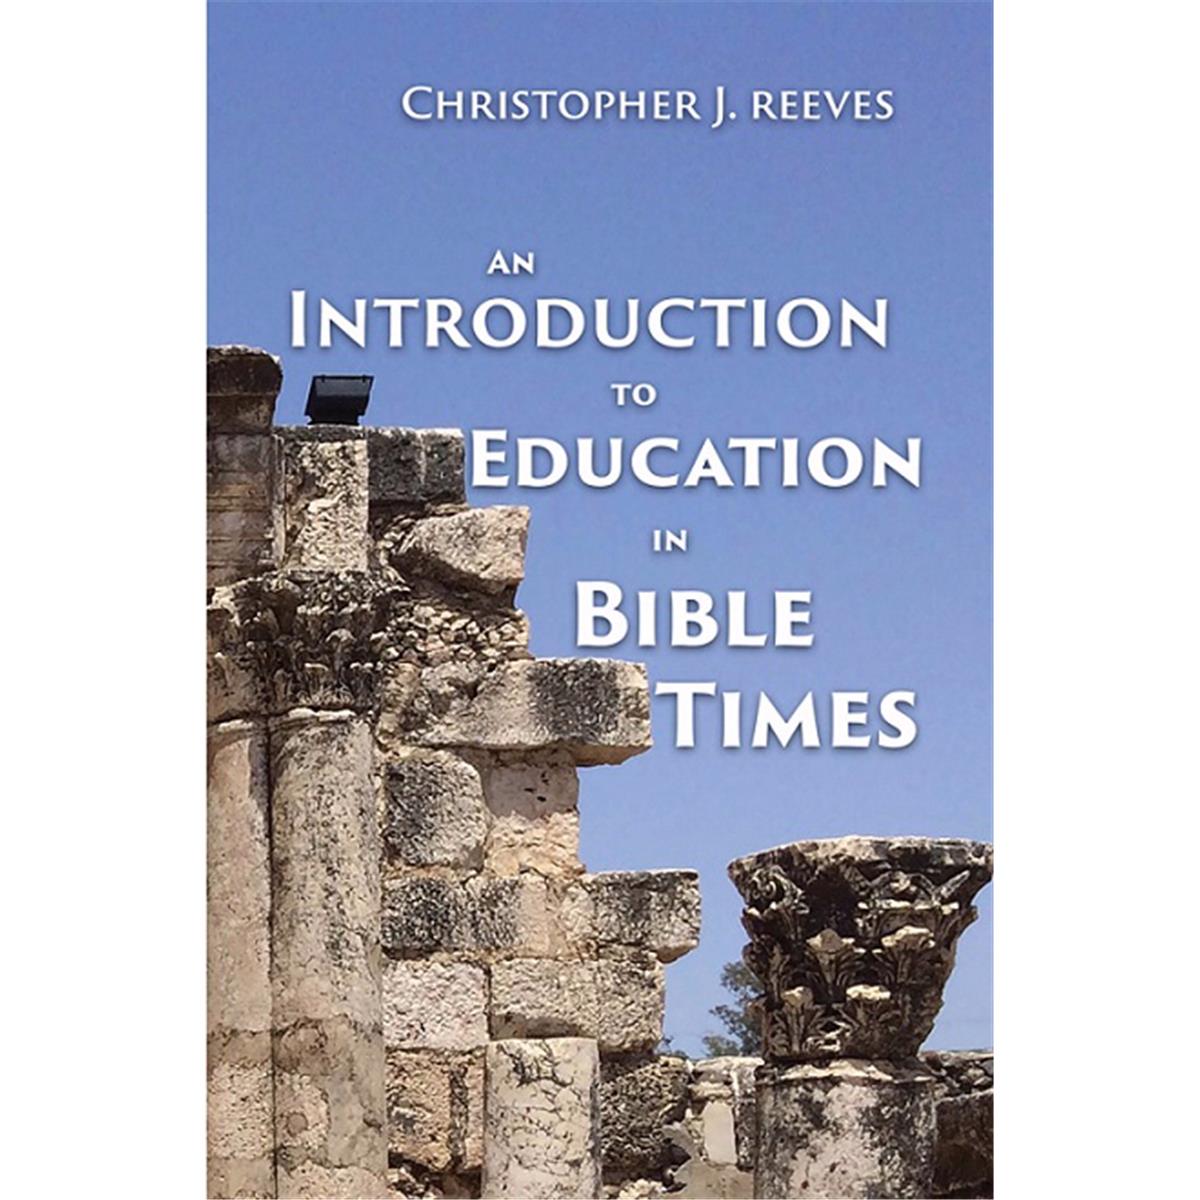 138809 An Introduction To Education In Bible Times